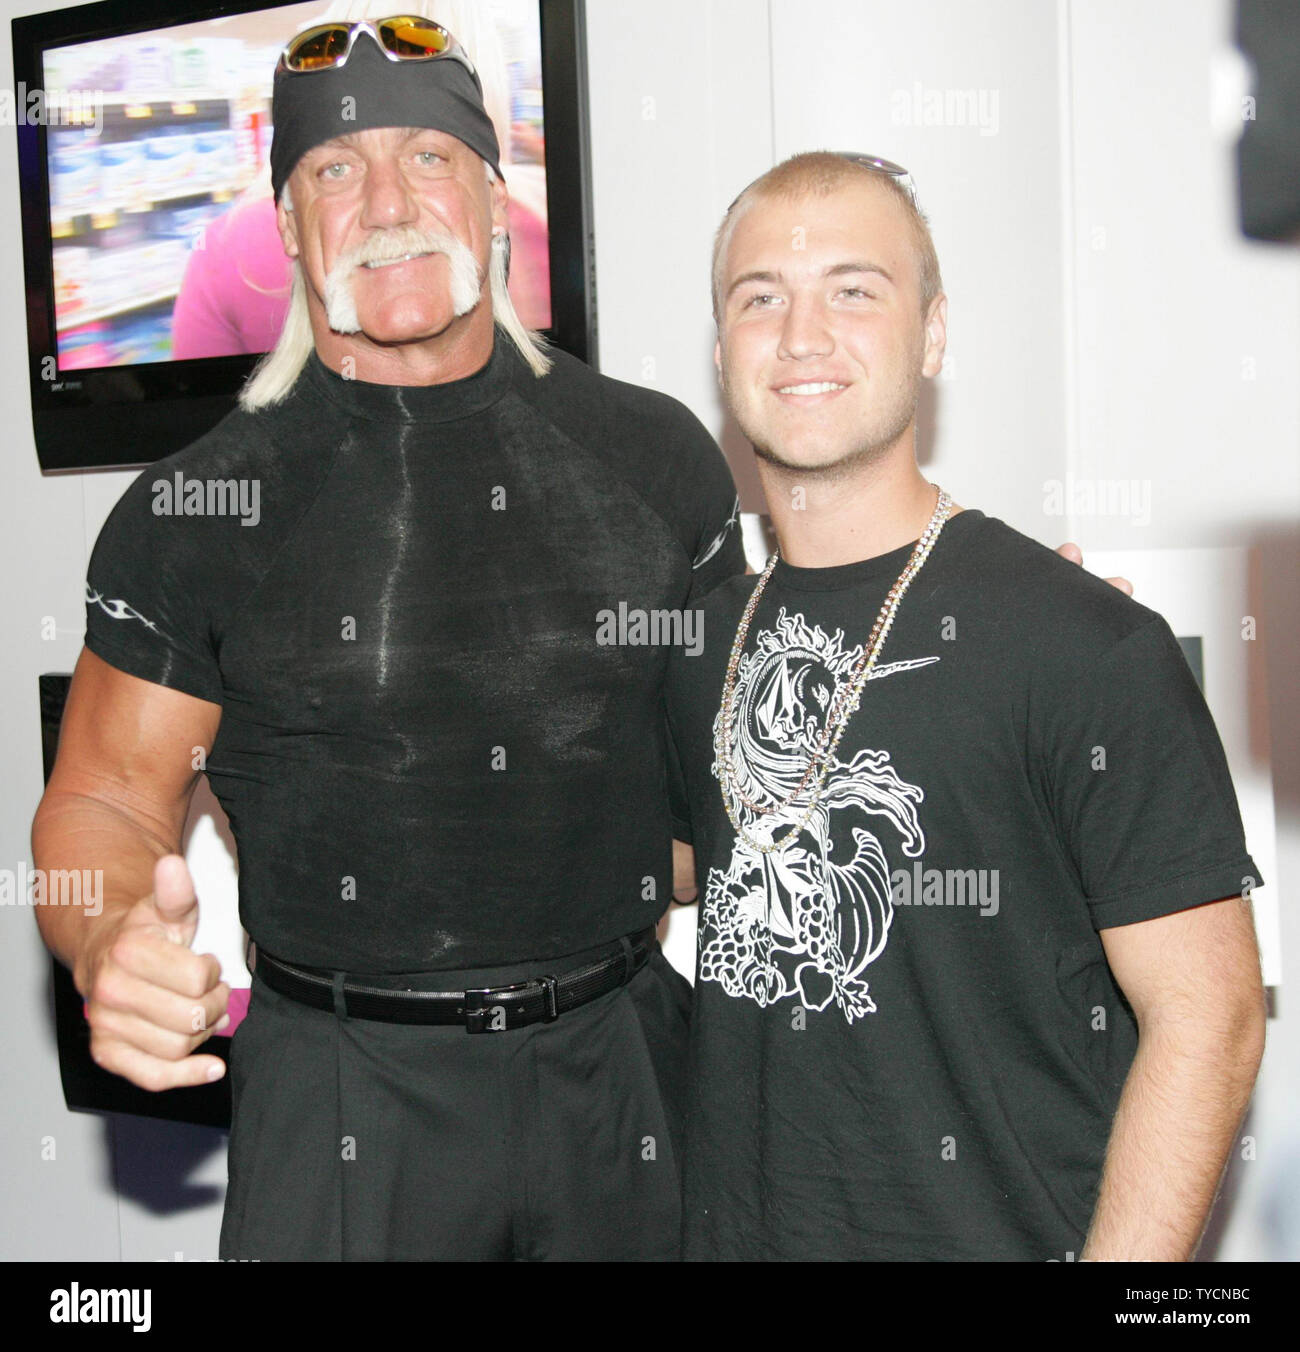 Wrestler-actor Hulk Hogan and his son Nick are seen at the Polaroid display at the 2007 Consumer Electronics Show at the Las Vegas Convention Center in Las Vegas January 10, 2007. (